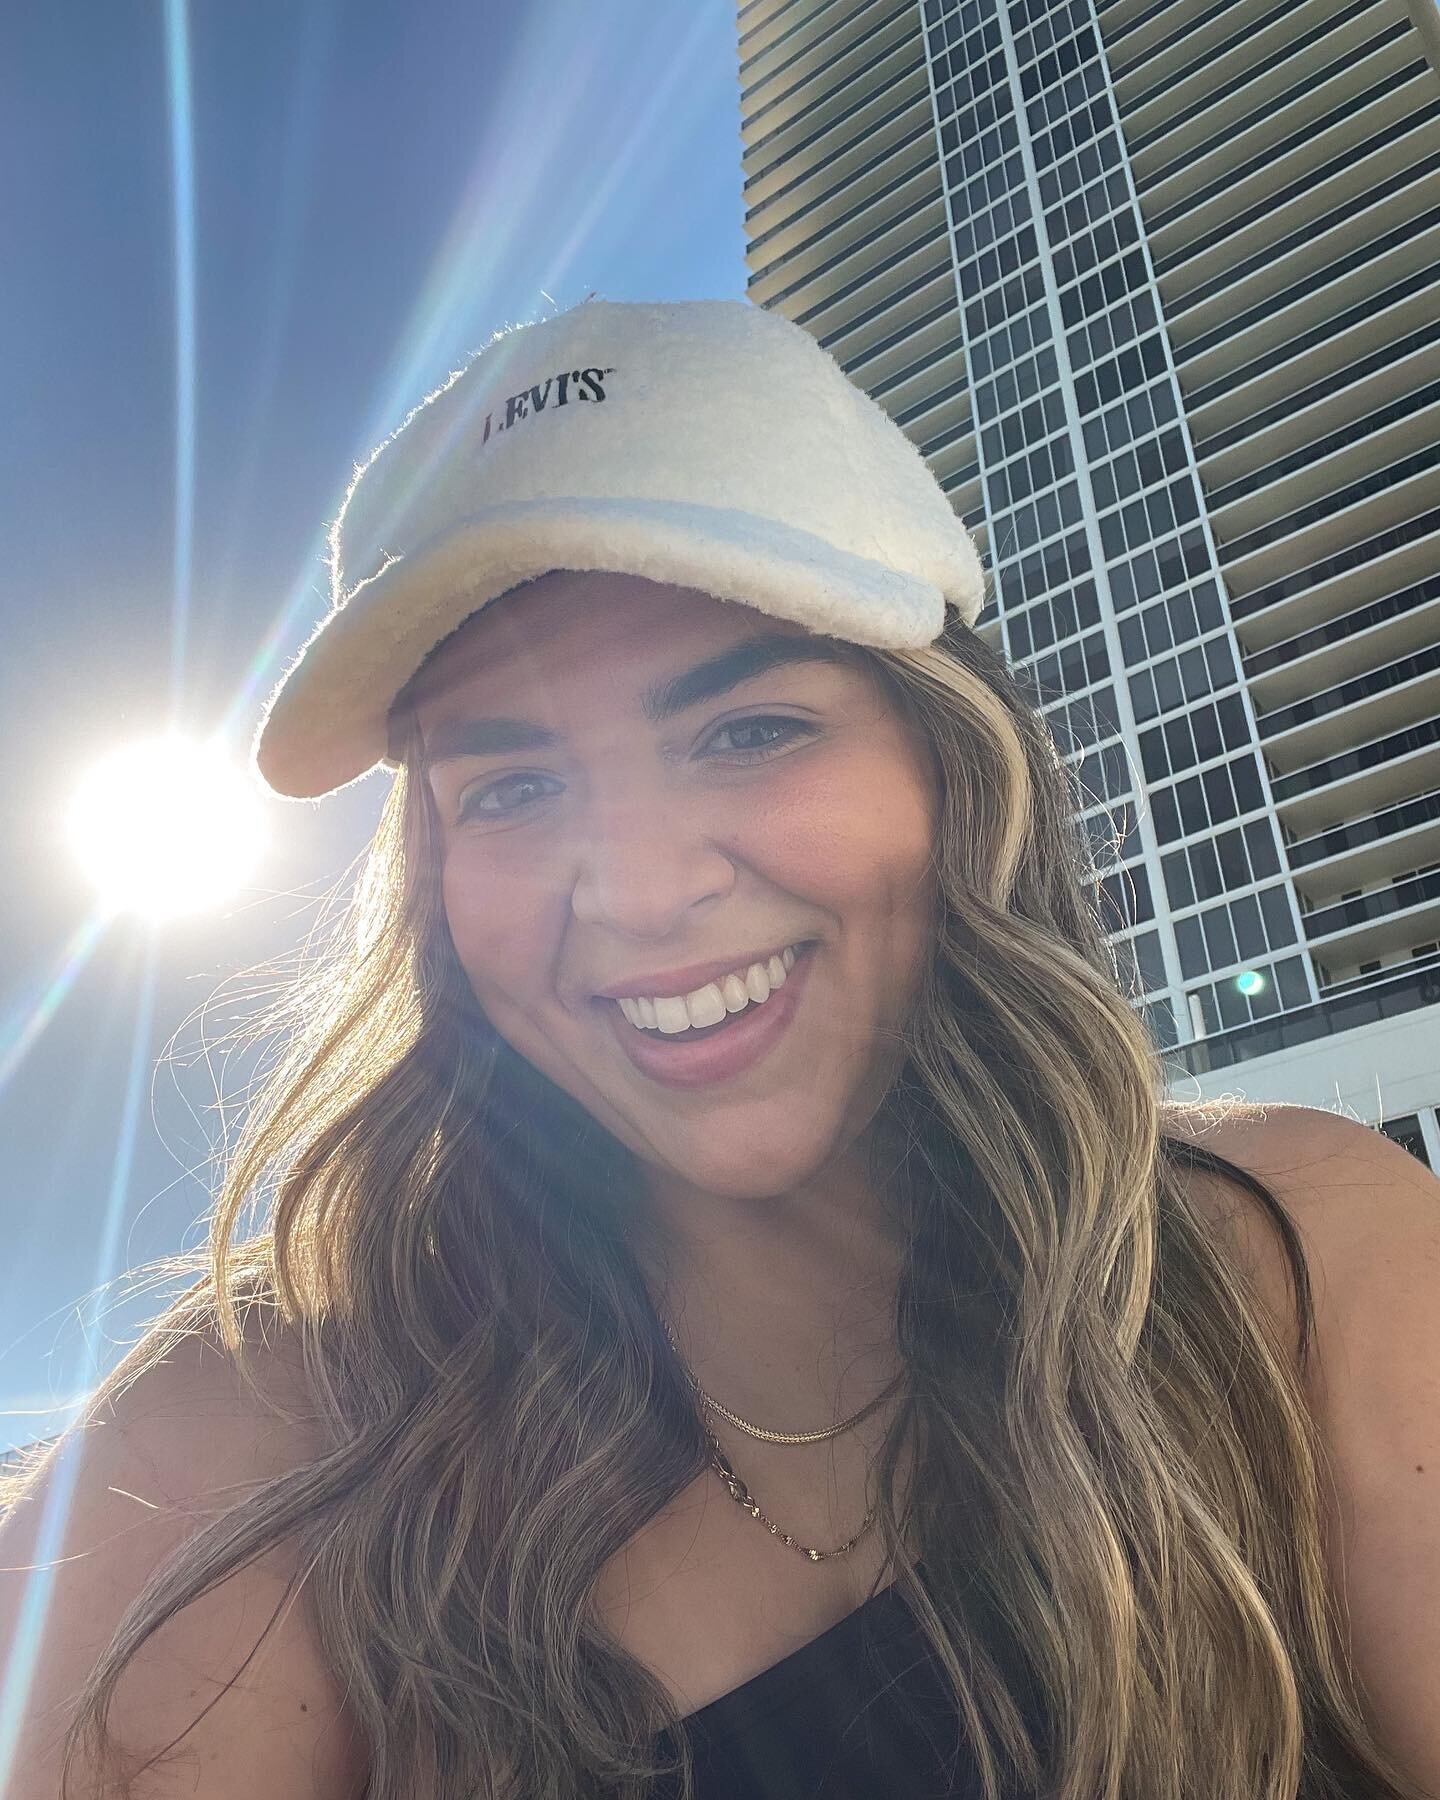 Saves from the weekend ☀️

Also, I never thought I&rsquo;d have a favorite baseball cap but here we are 🤗 I haven&rsquo;t put this @levis cap down since I got it 🤍

Linking it in my blogs shop page (link in bio) / currently 30% off / under $20 🖤